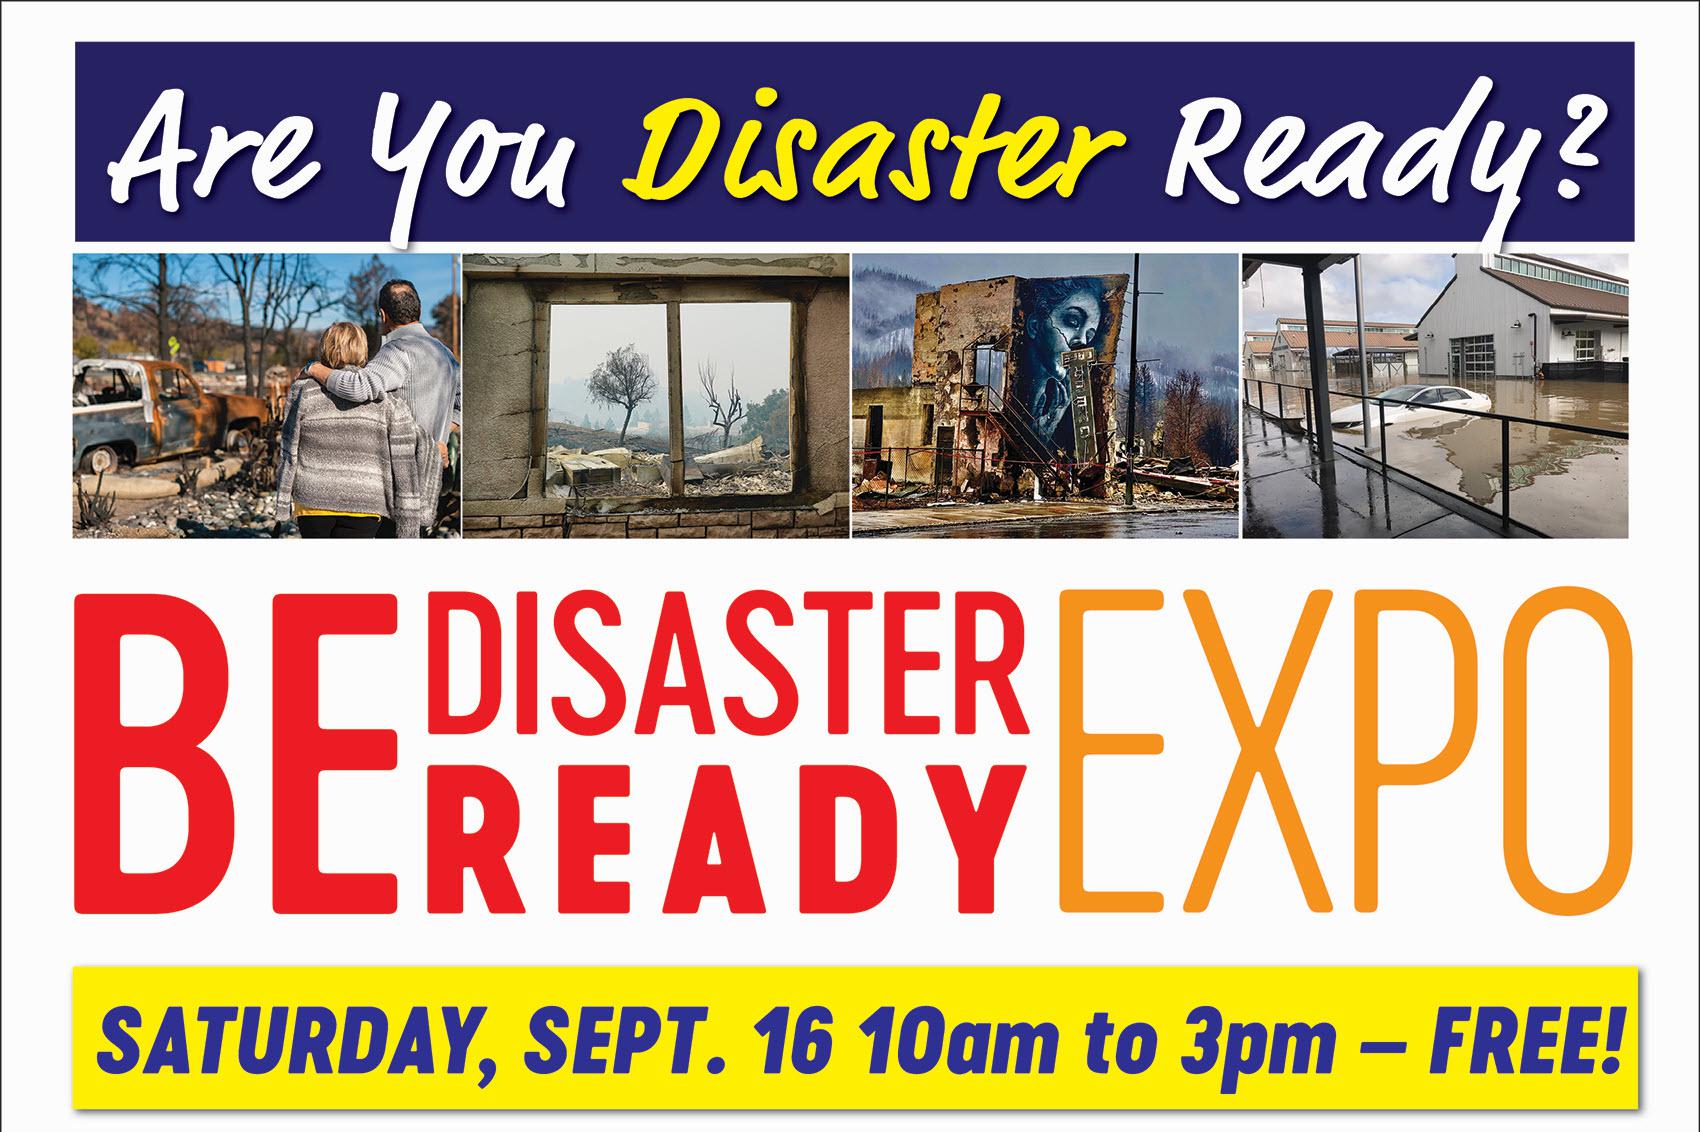 More information about "BE DISASTER READY EXPO - Sept. 16 -- 10am to 3pm - FREE"